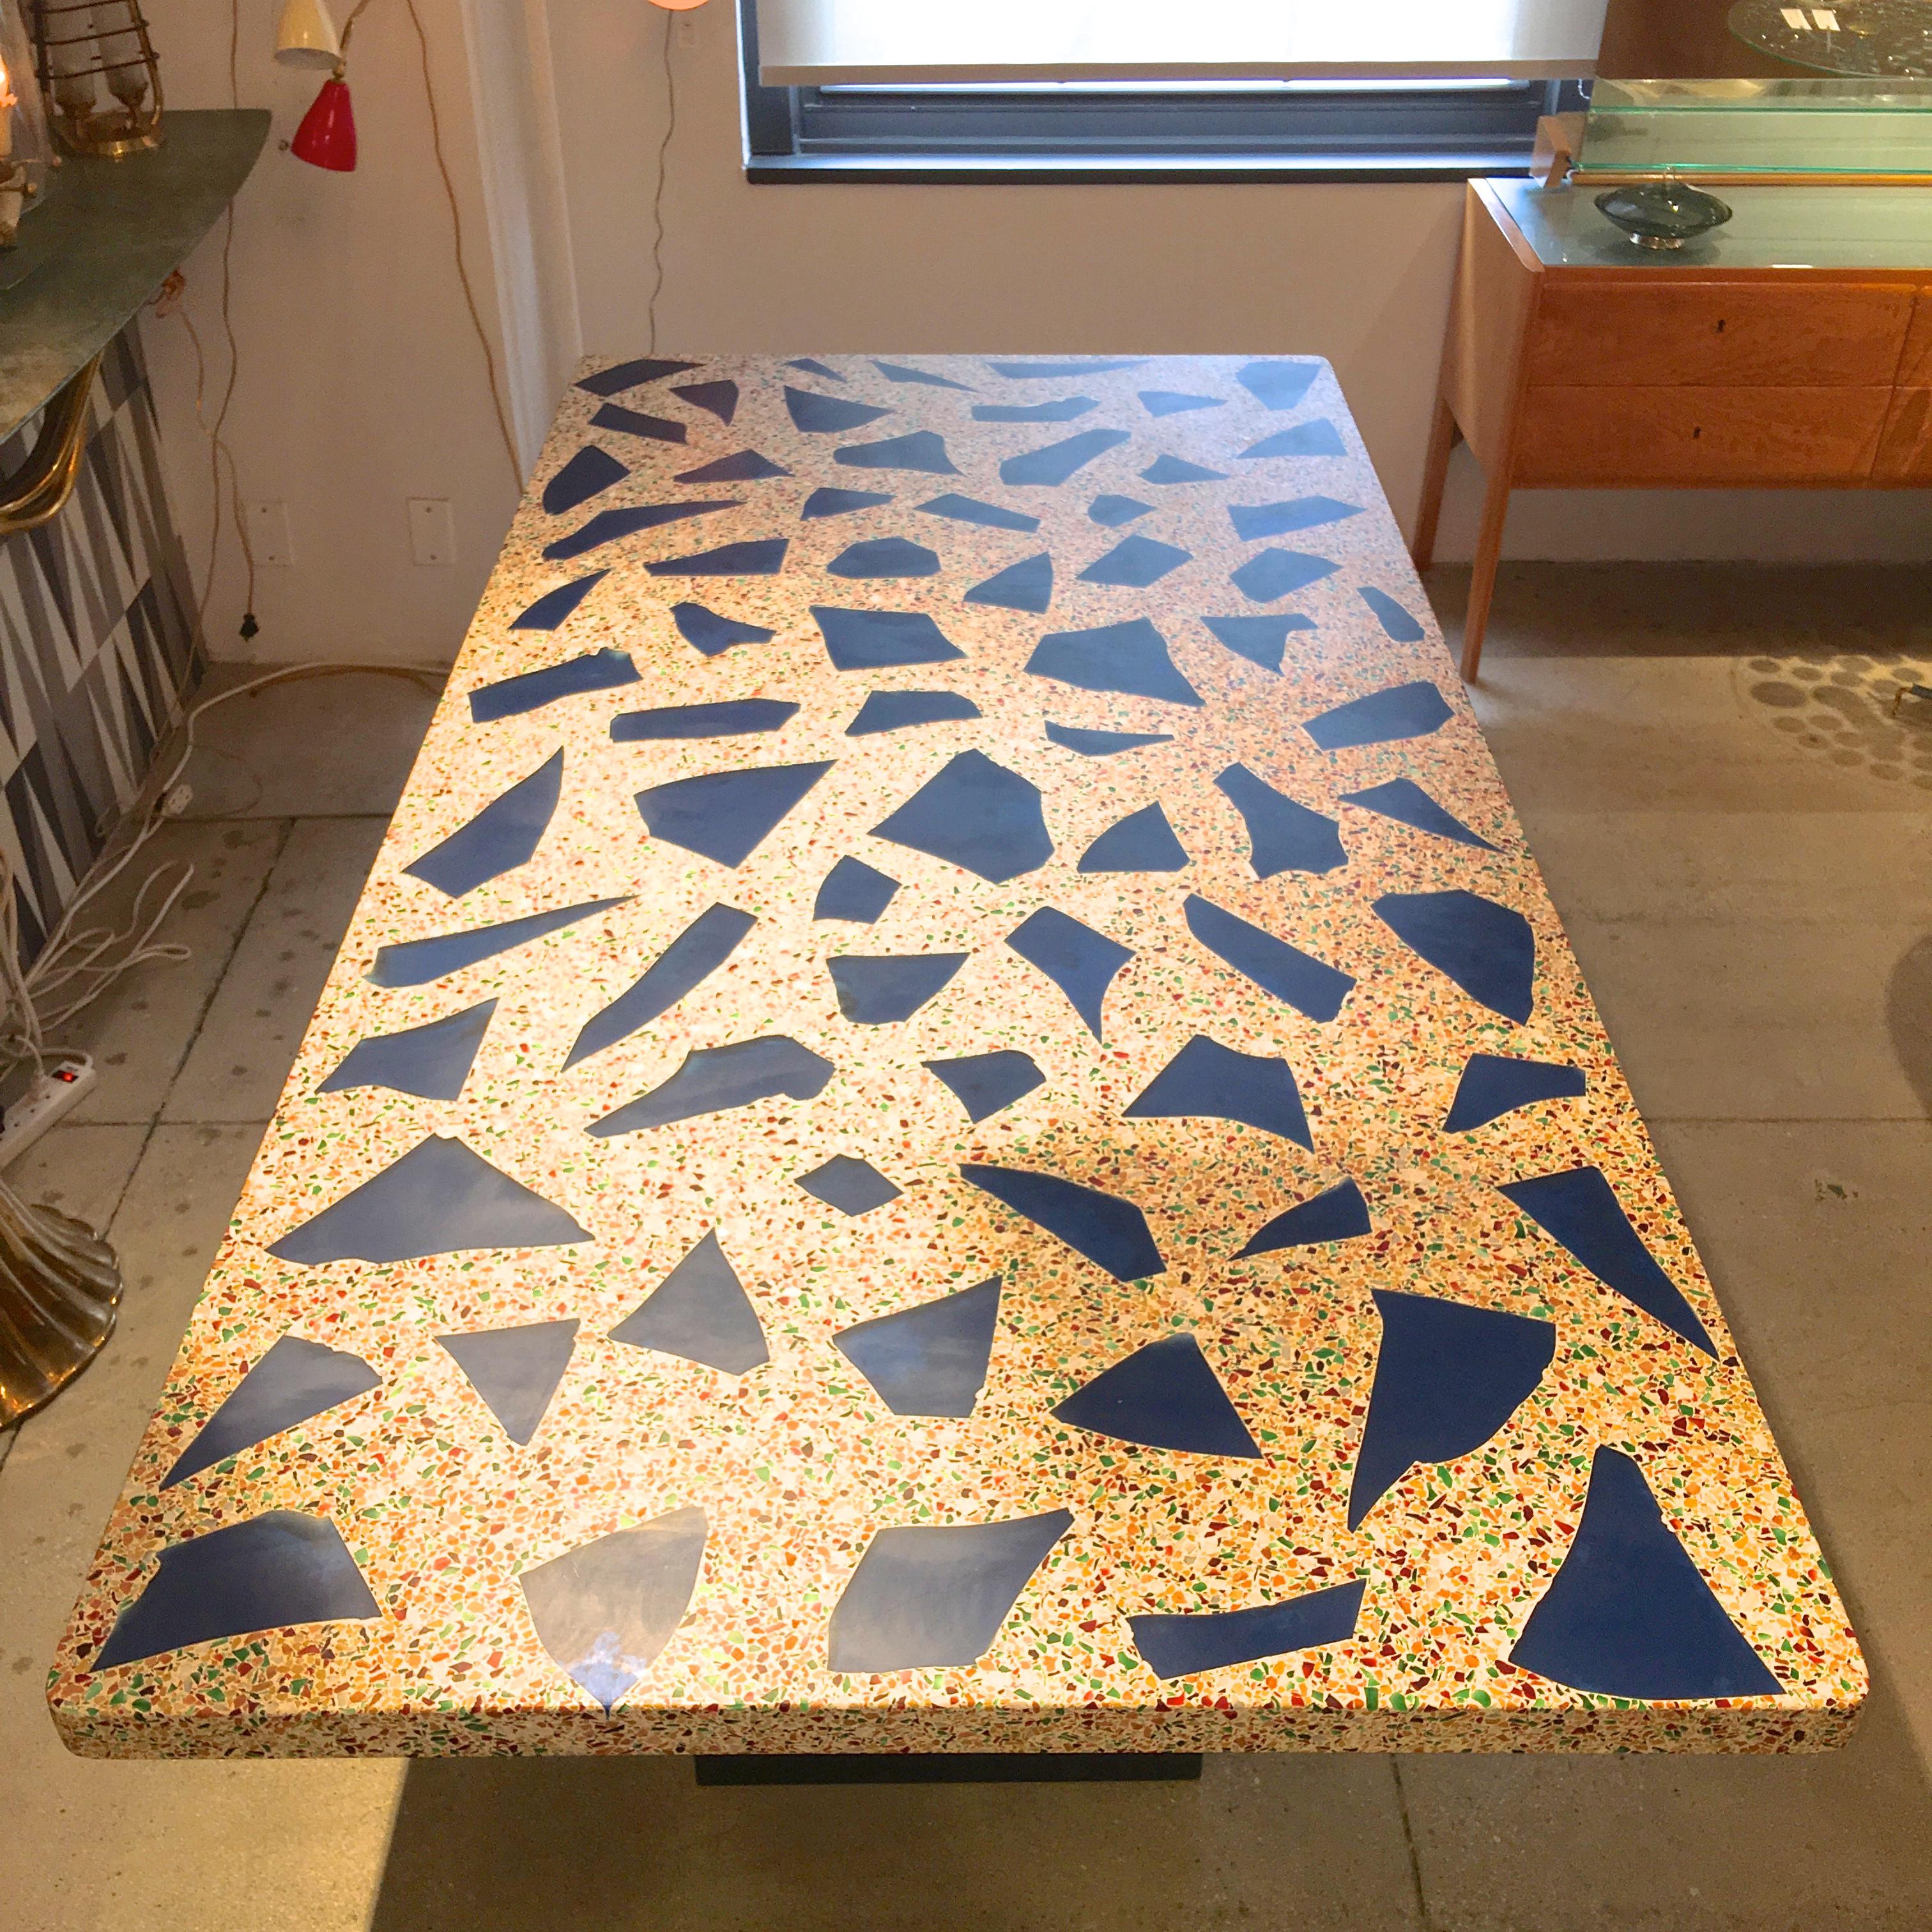 Amazing vintage solid terrazzo stone slab with a hundred or so irregularly shaped chunks of blue glass inset amongst the mix of smaller pieces of colored glass and stone. Top is 2 inches thick. The underside is polished as well without the large